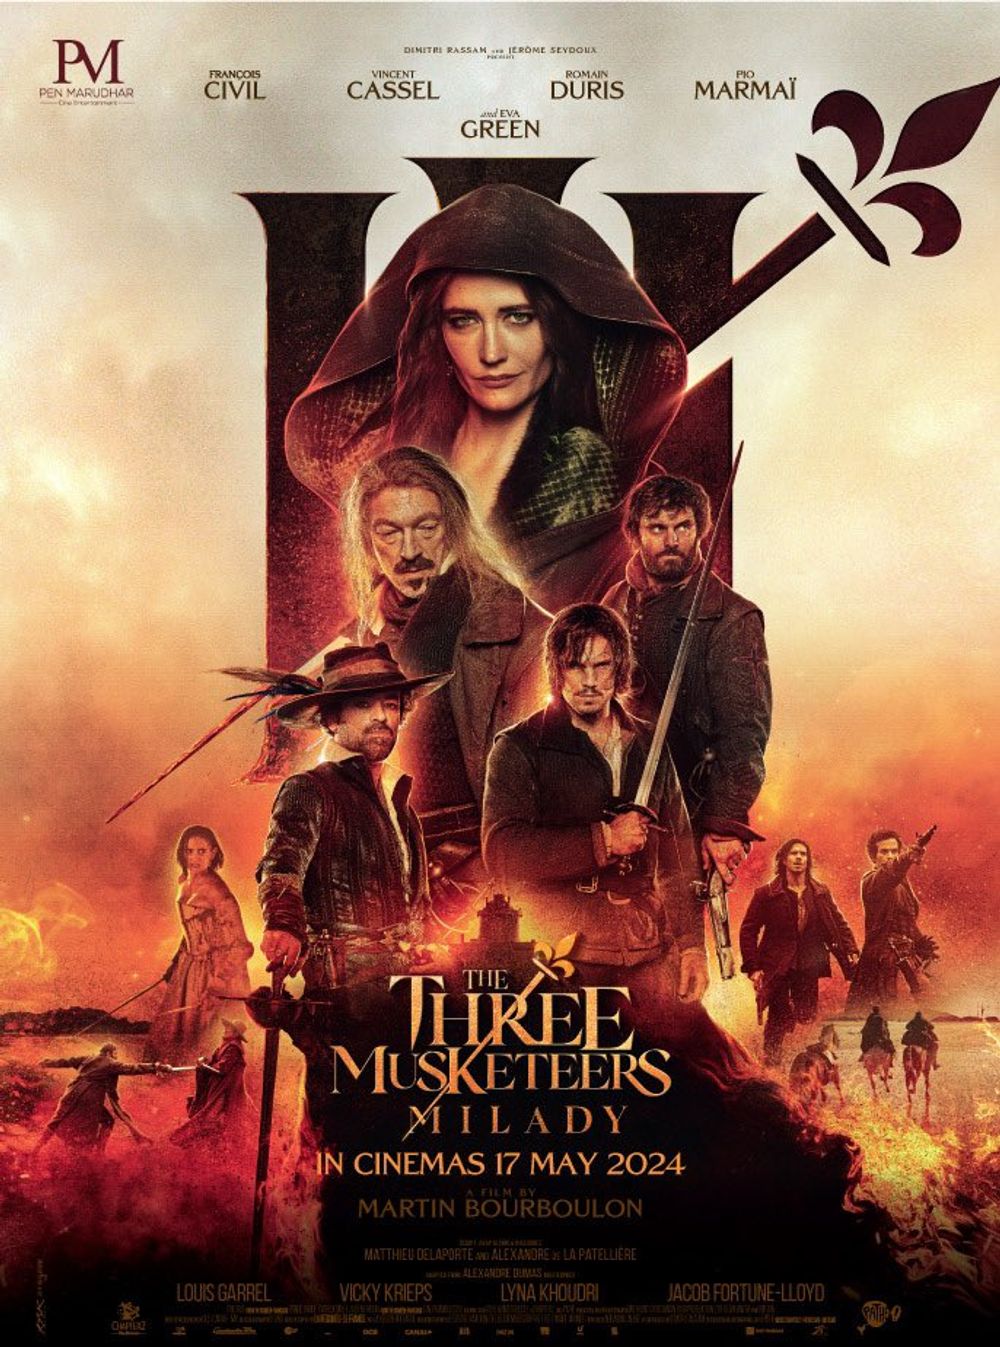 The Three Musketeers: Milady Movie Review